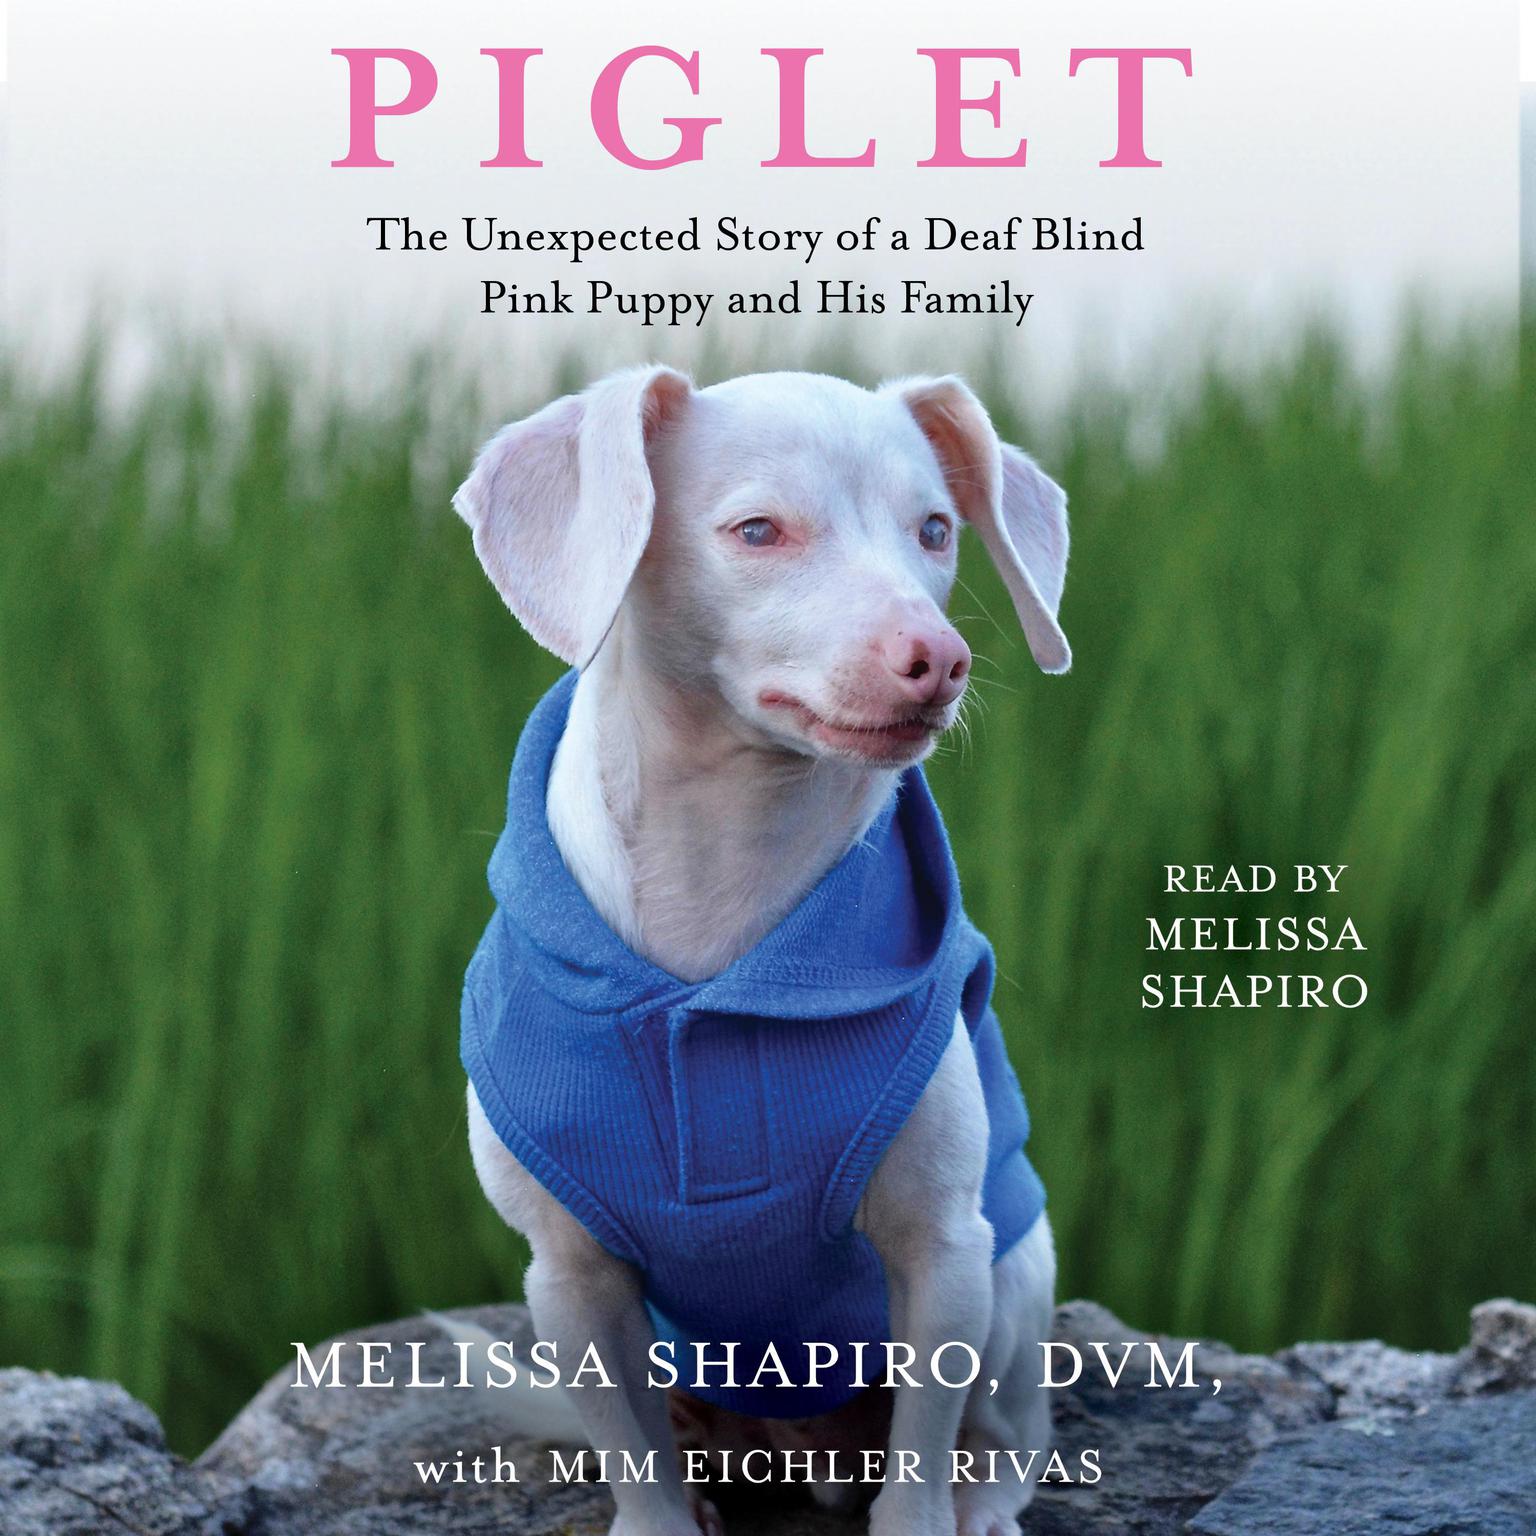 Piglet: The Unexpected Story of a Deaf, Blind, Pink Puppy and His Family Audiobook, by Melissa Shapiro